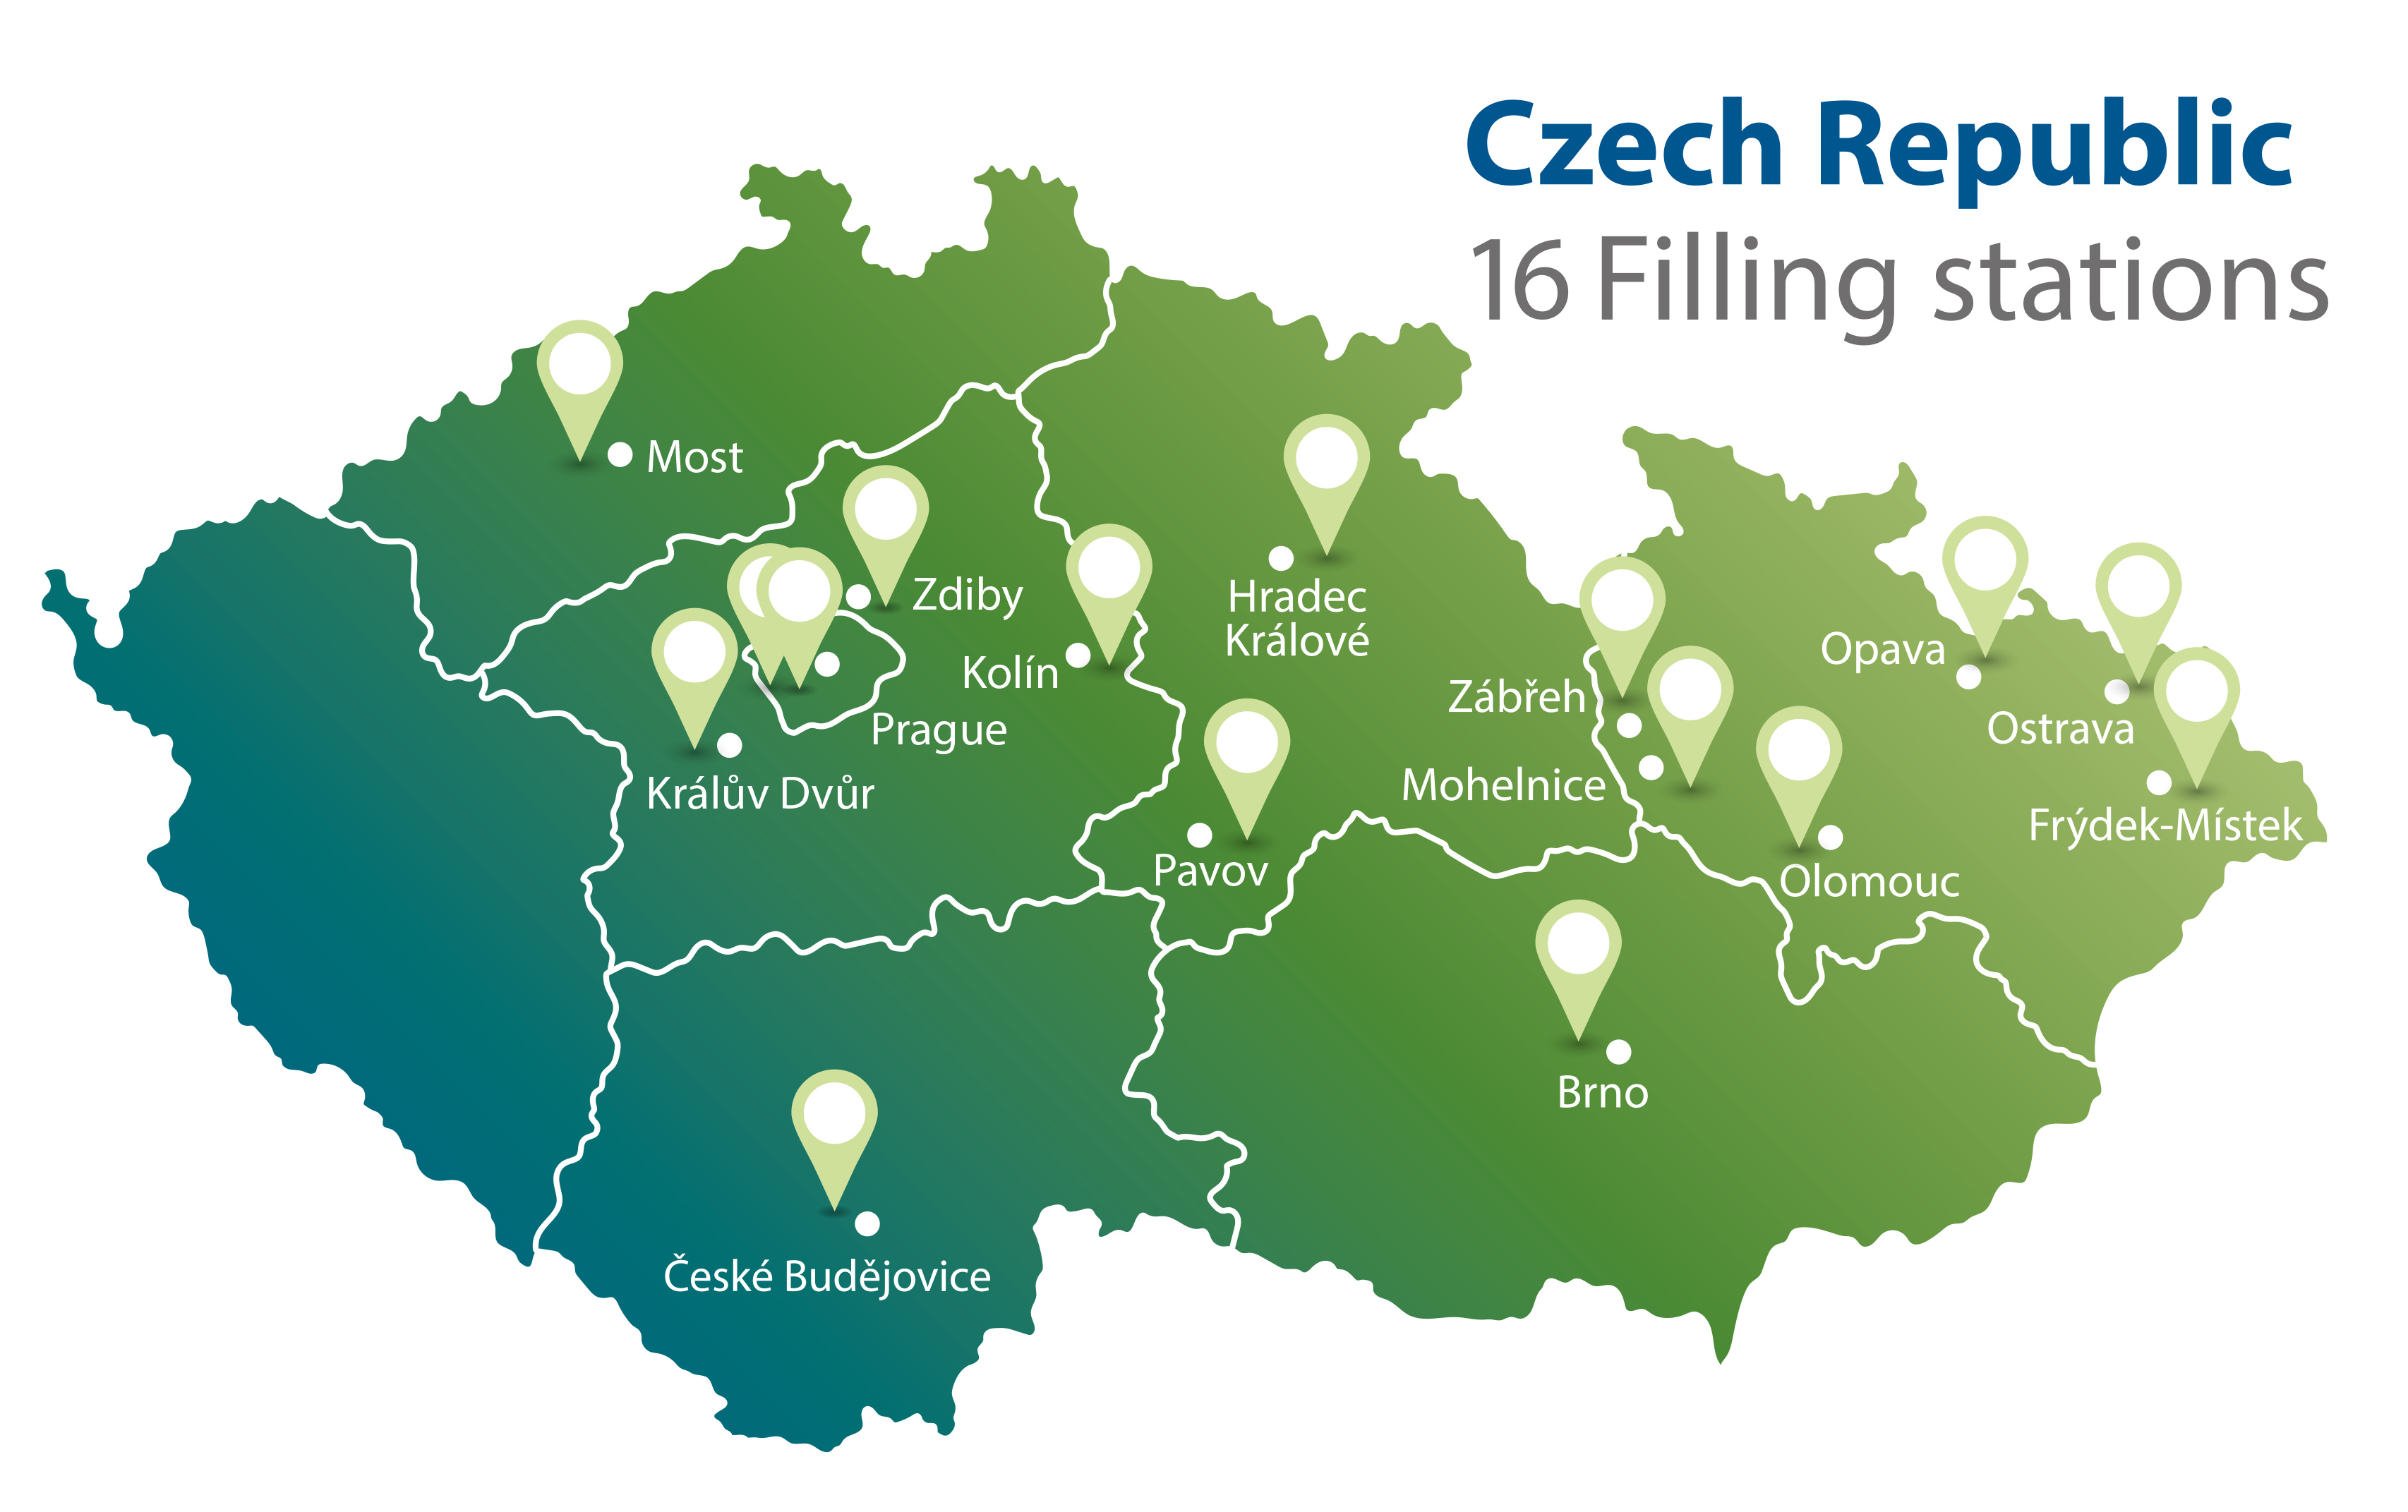 Our CNG stations in the Czech Republic